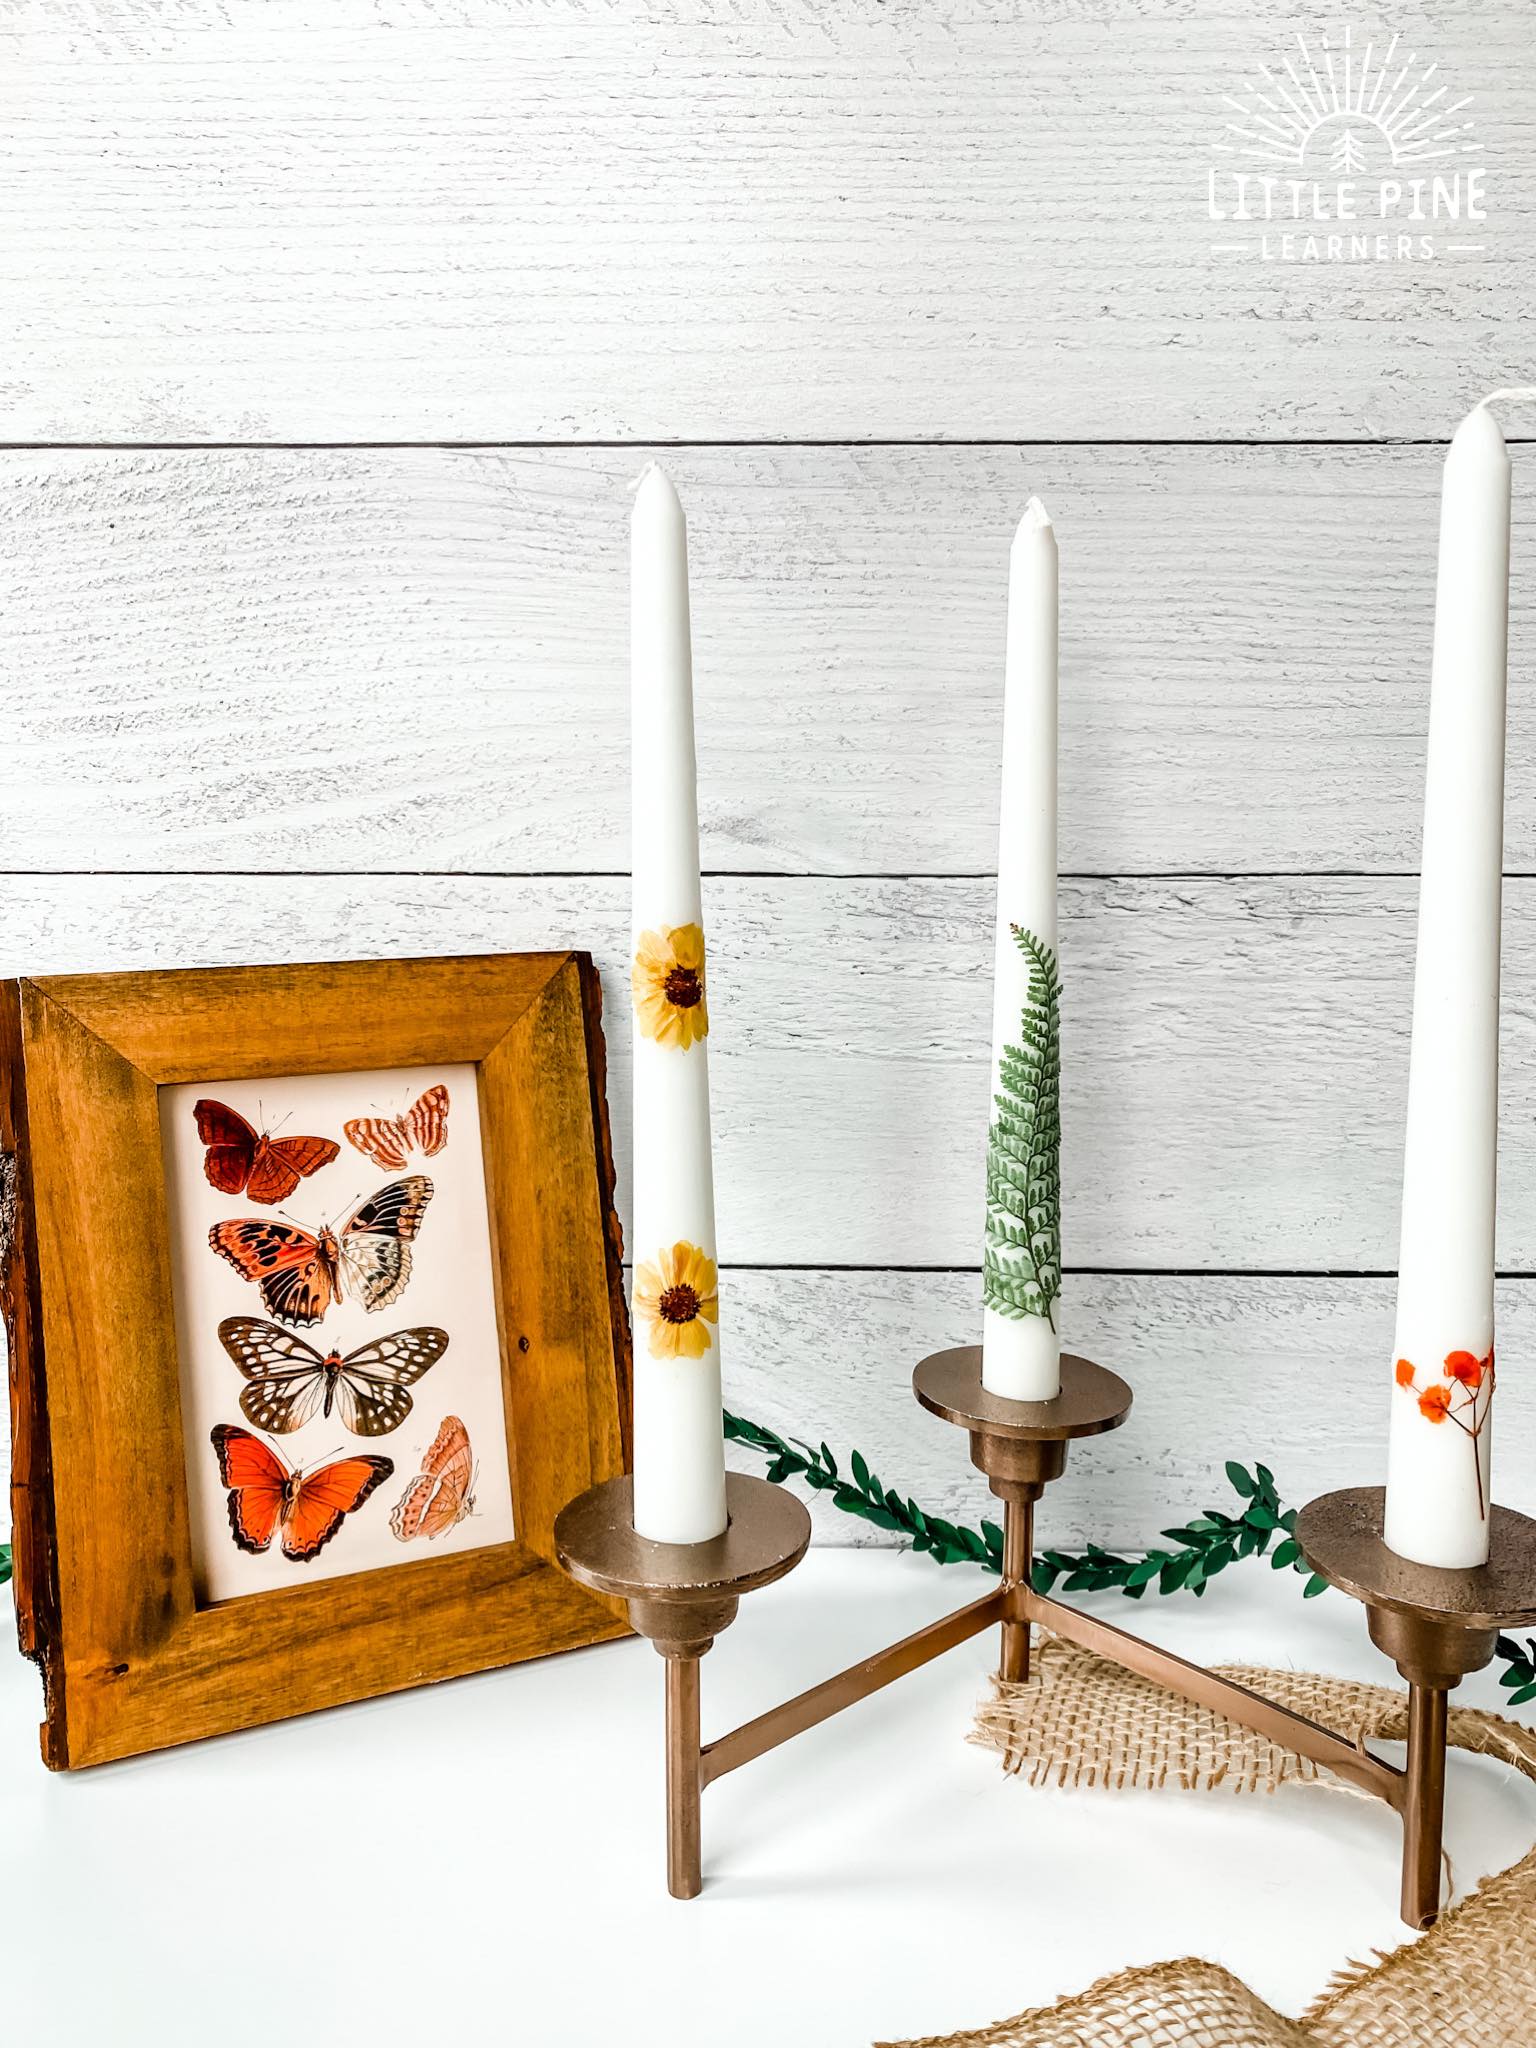 Beautiful pressed flower candles